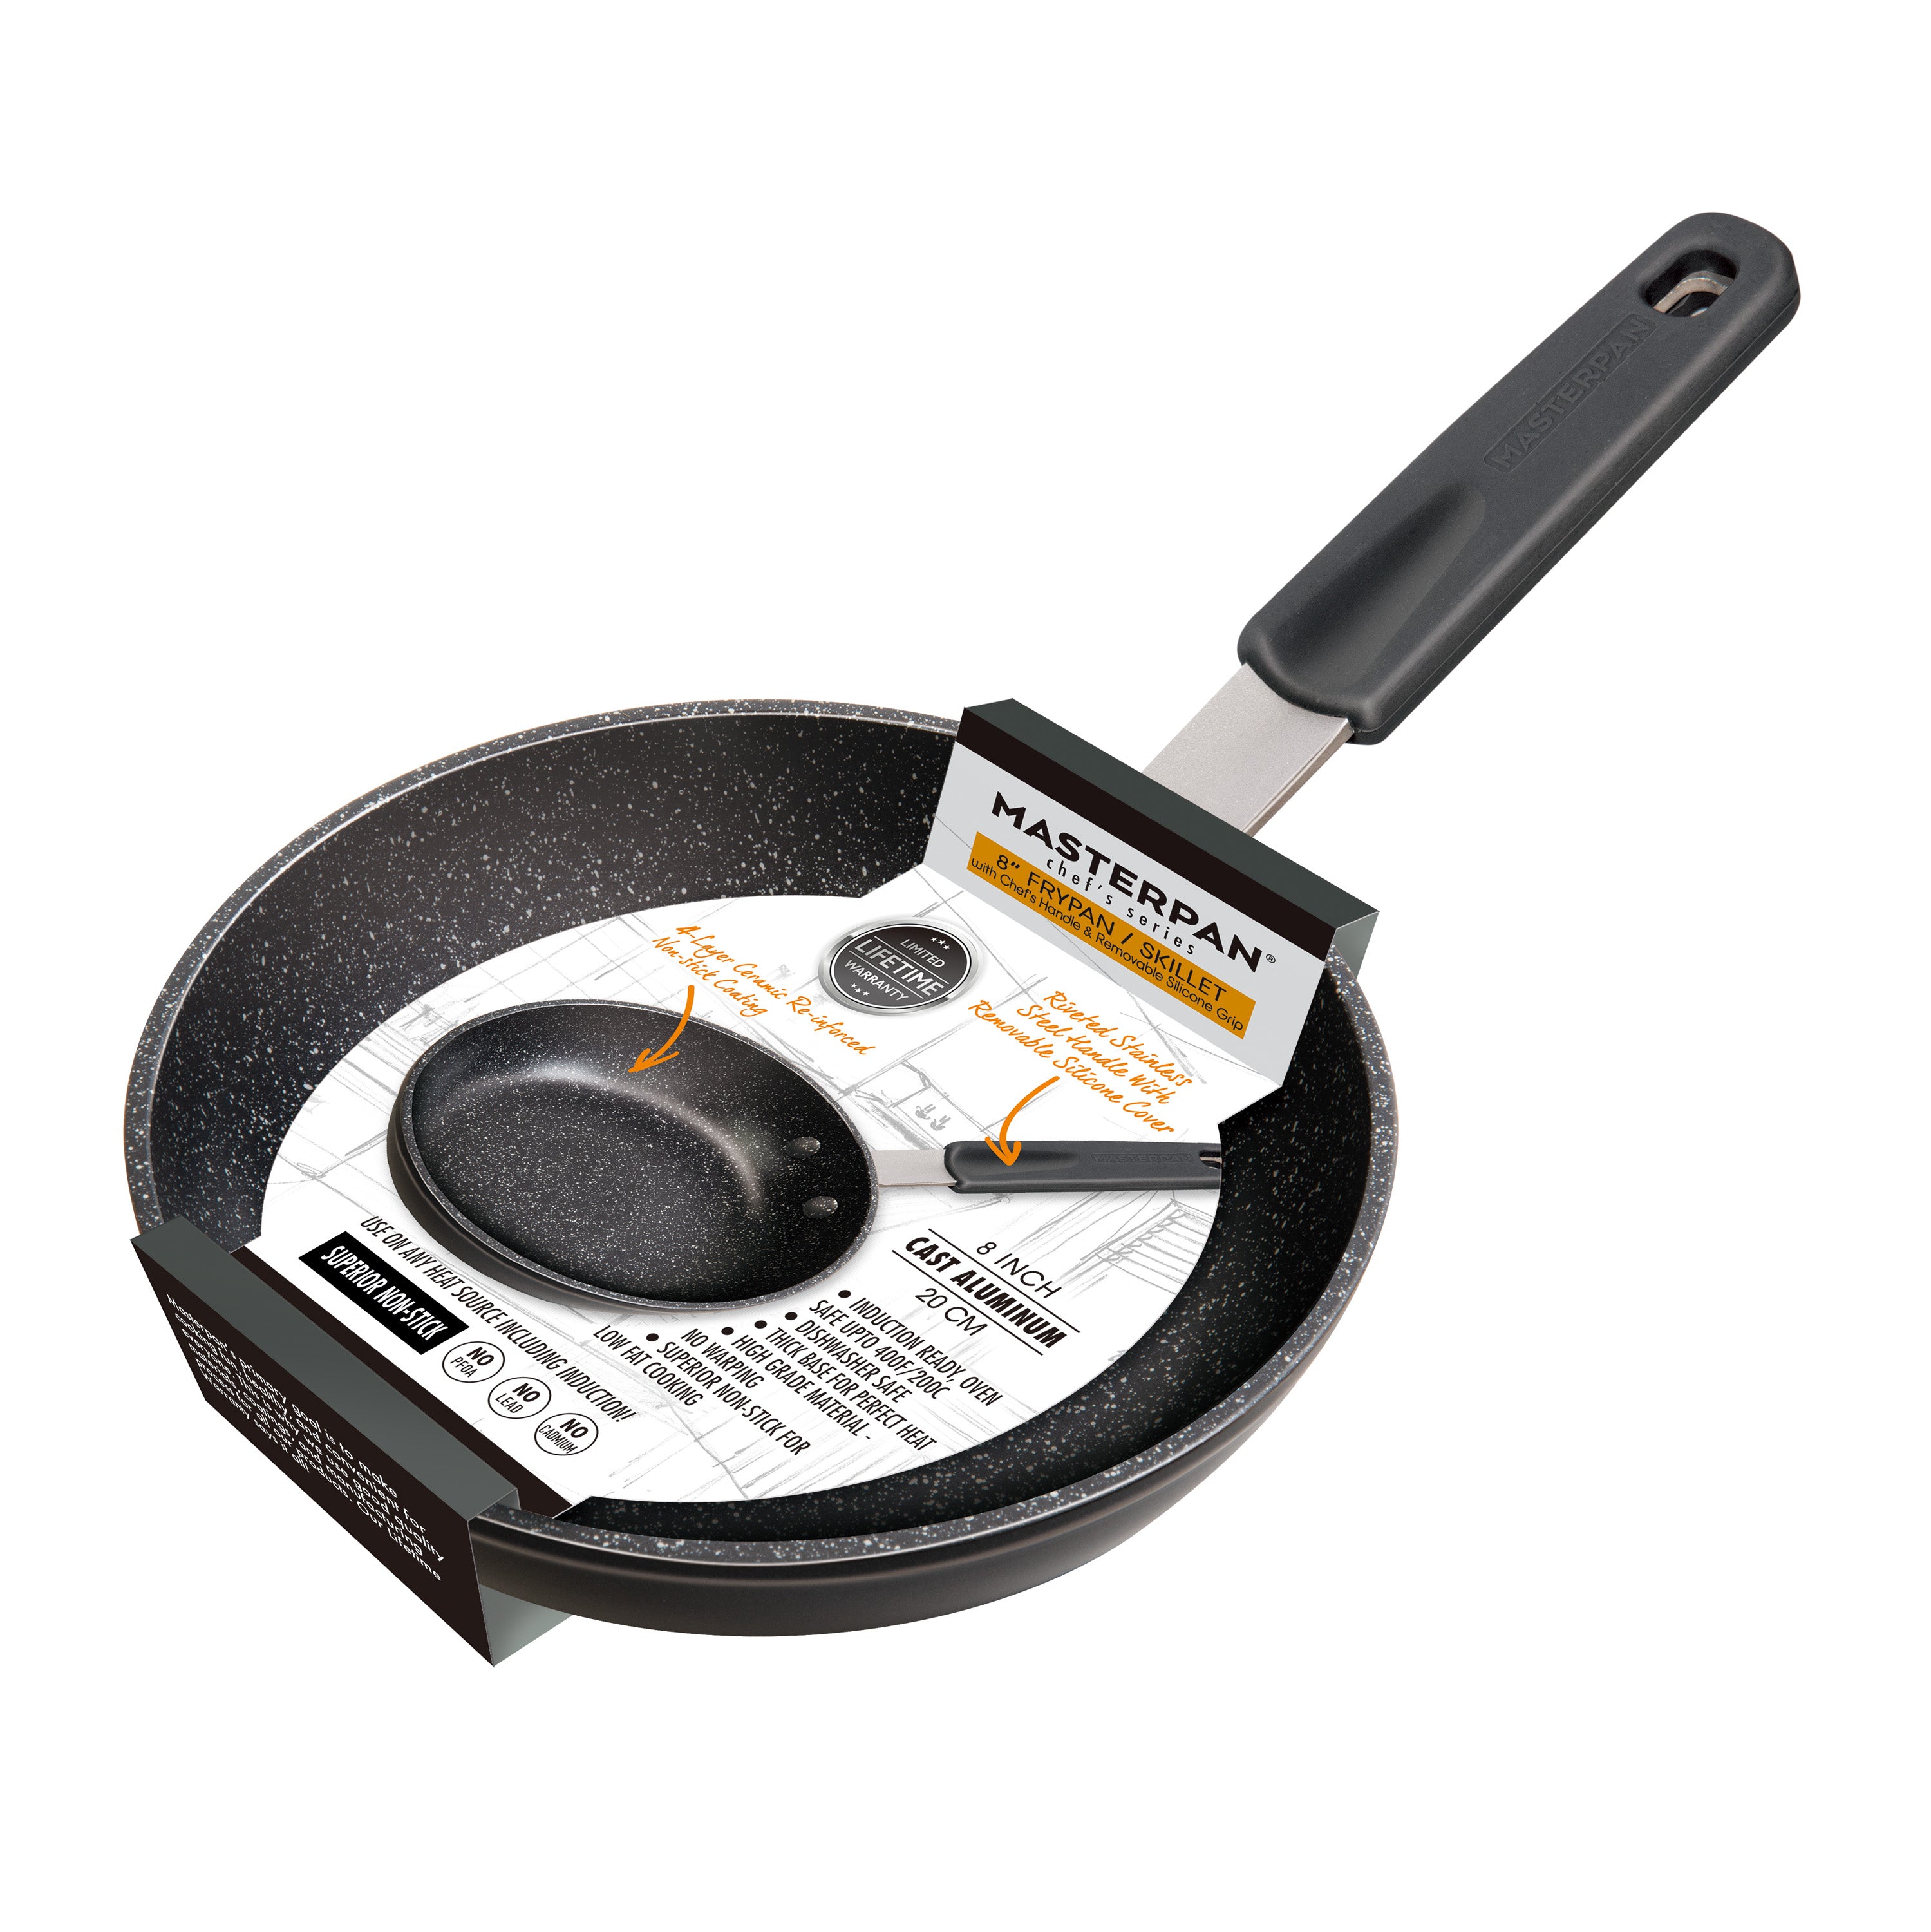 Choice Black Removable Silicone Pan Handle Sleeve for 14 Fry Pans